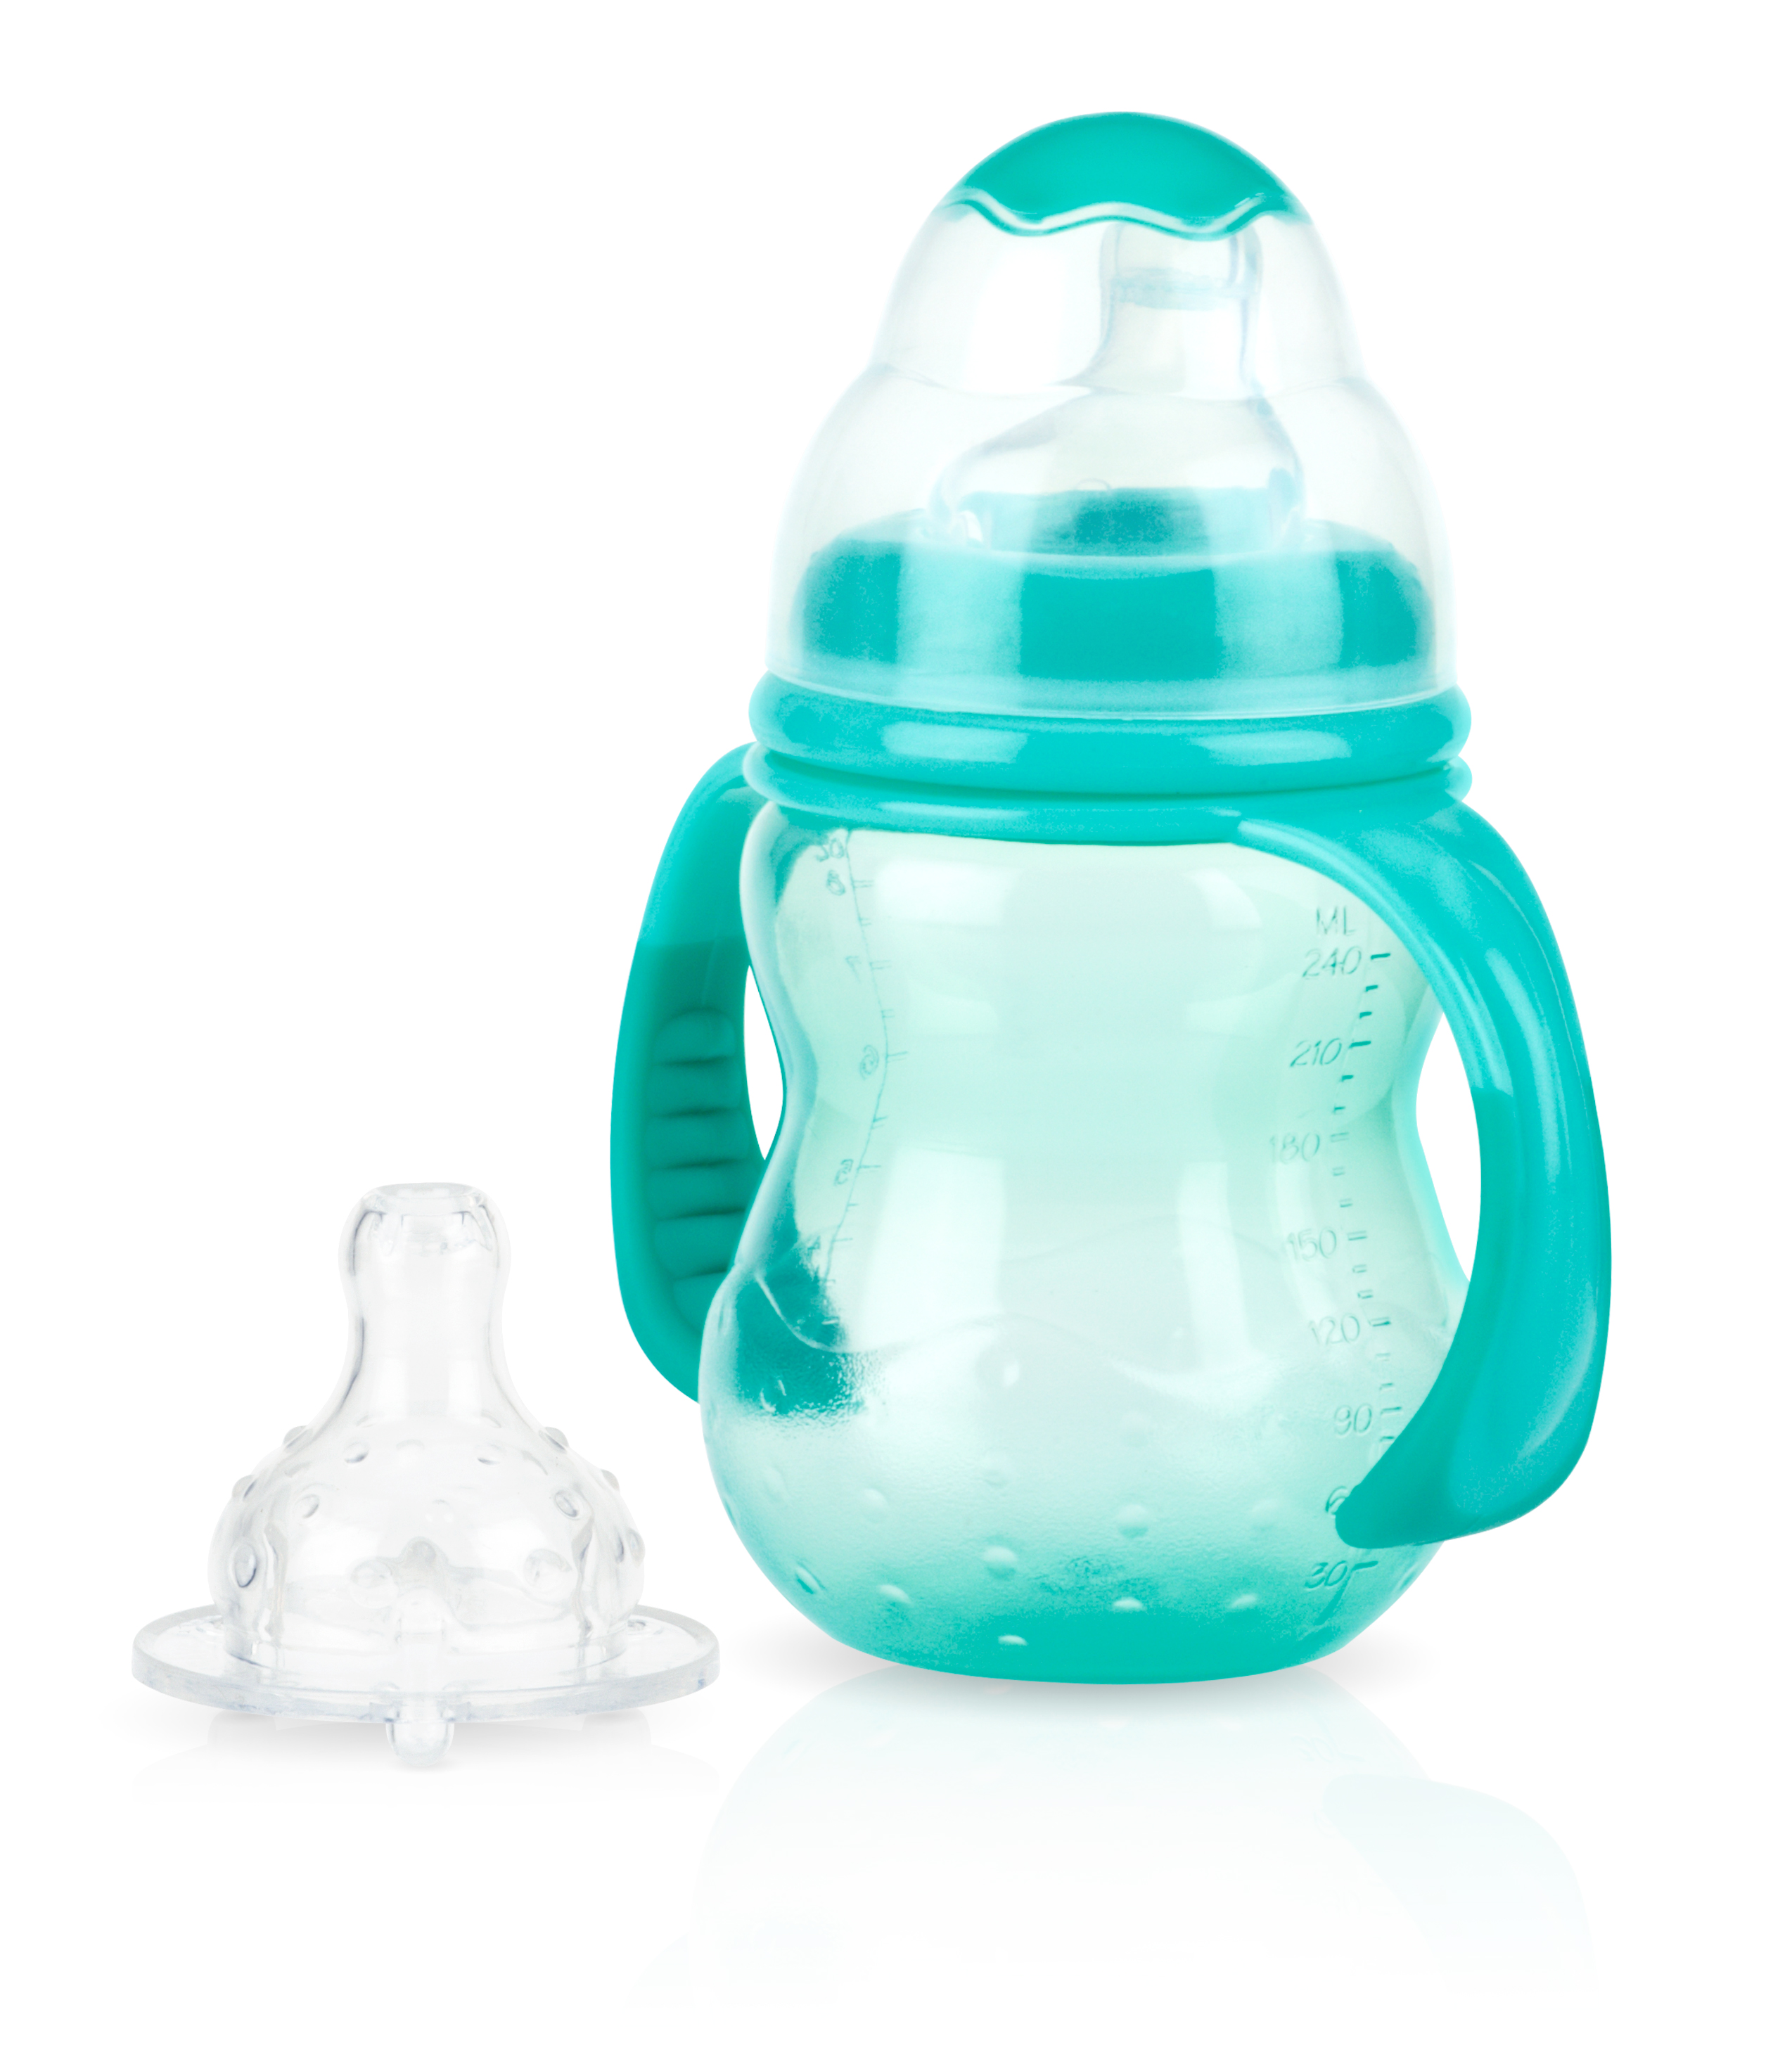 Nuby 3 Stage Baby Bottle with Handles, 3m+, Wide-Neck, 8 oz - image 2 of 3